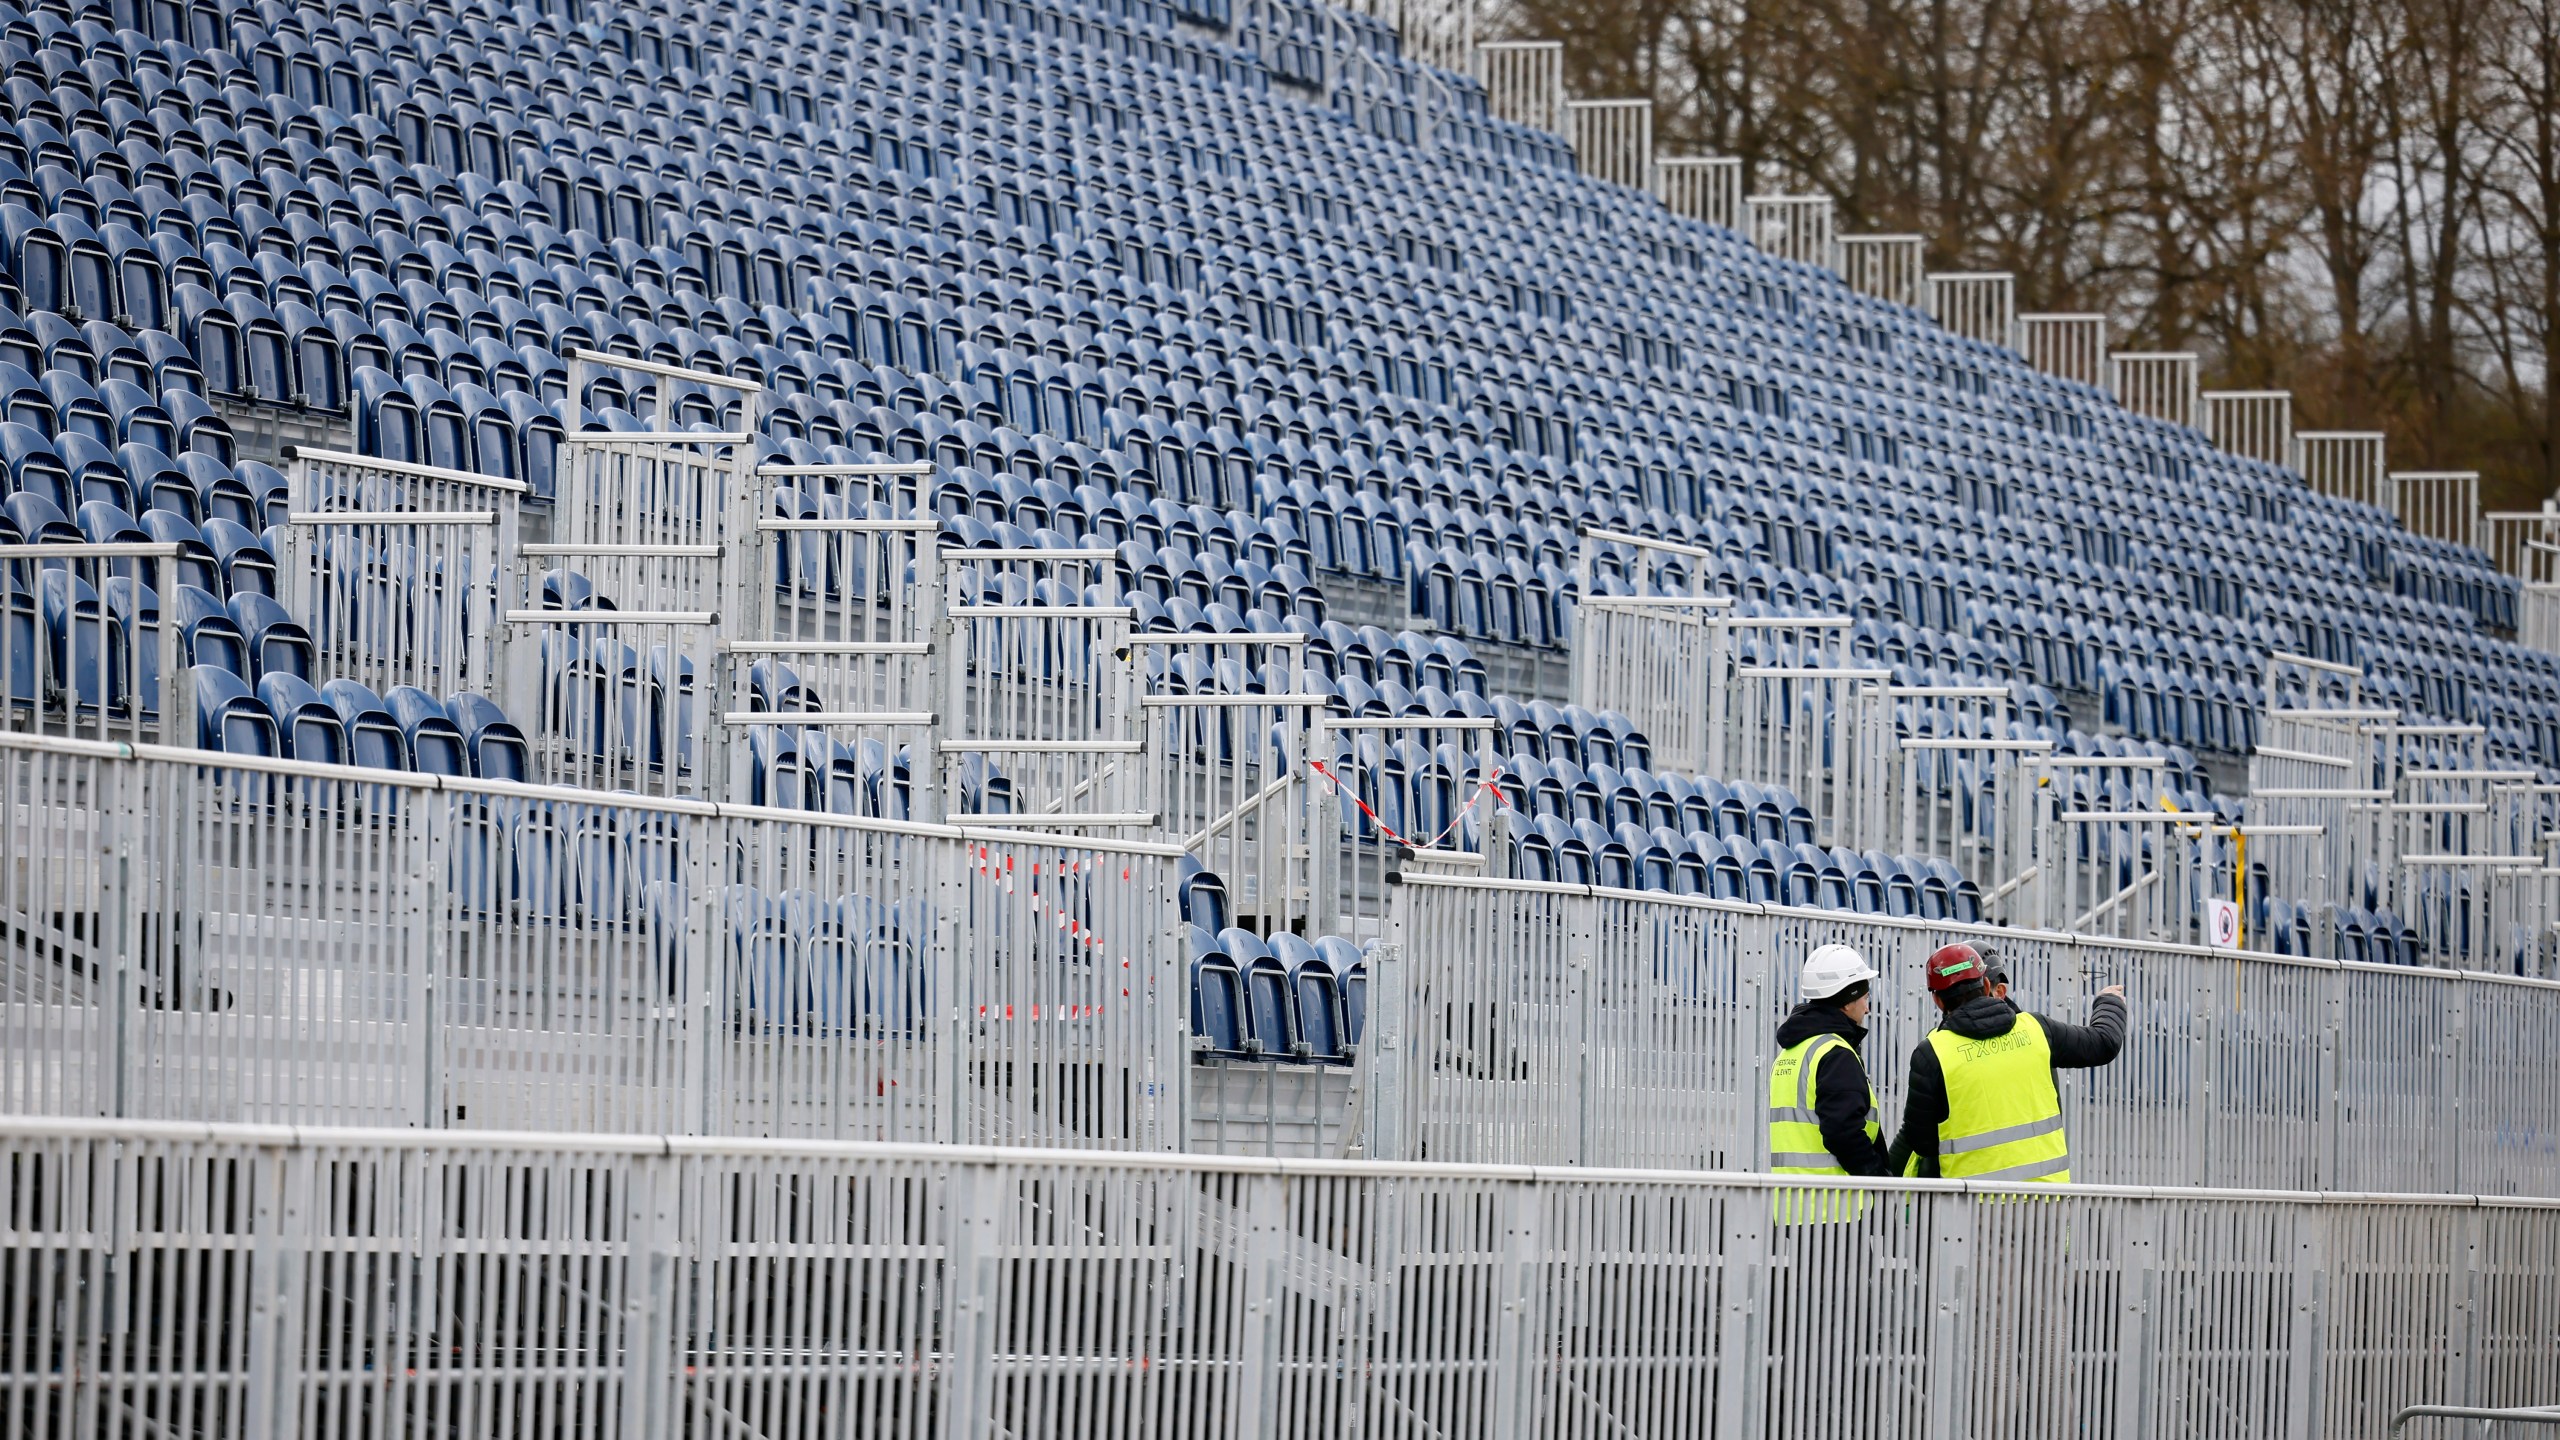 Workers discuss in the stands to watch the equestrian sports, Friday, March 29, 2024 in the park of the Chateau de Versailles, west of Paris. The site will be the venue for equestrian sports at the Paris 2024 Olympic Games. (AP Photo/Thomas Padilla)